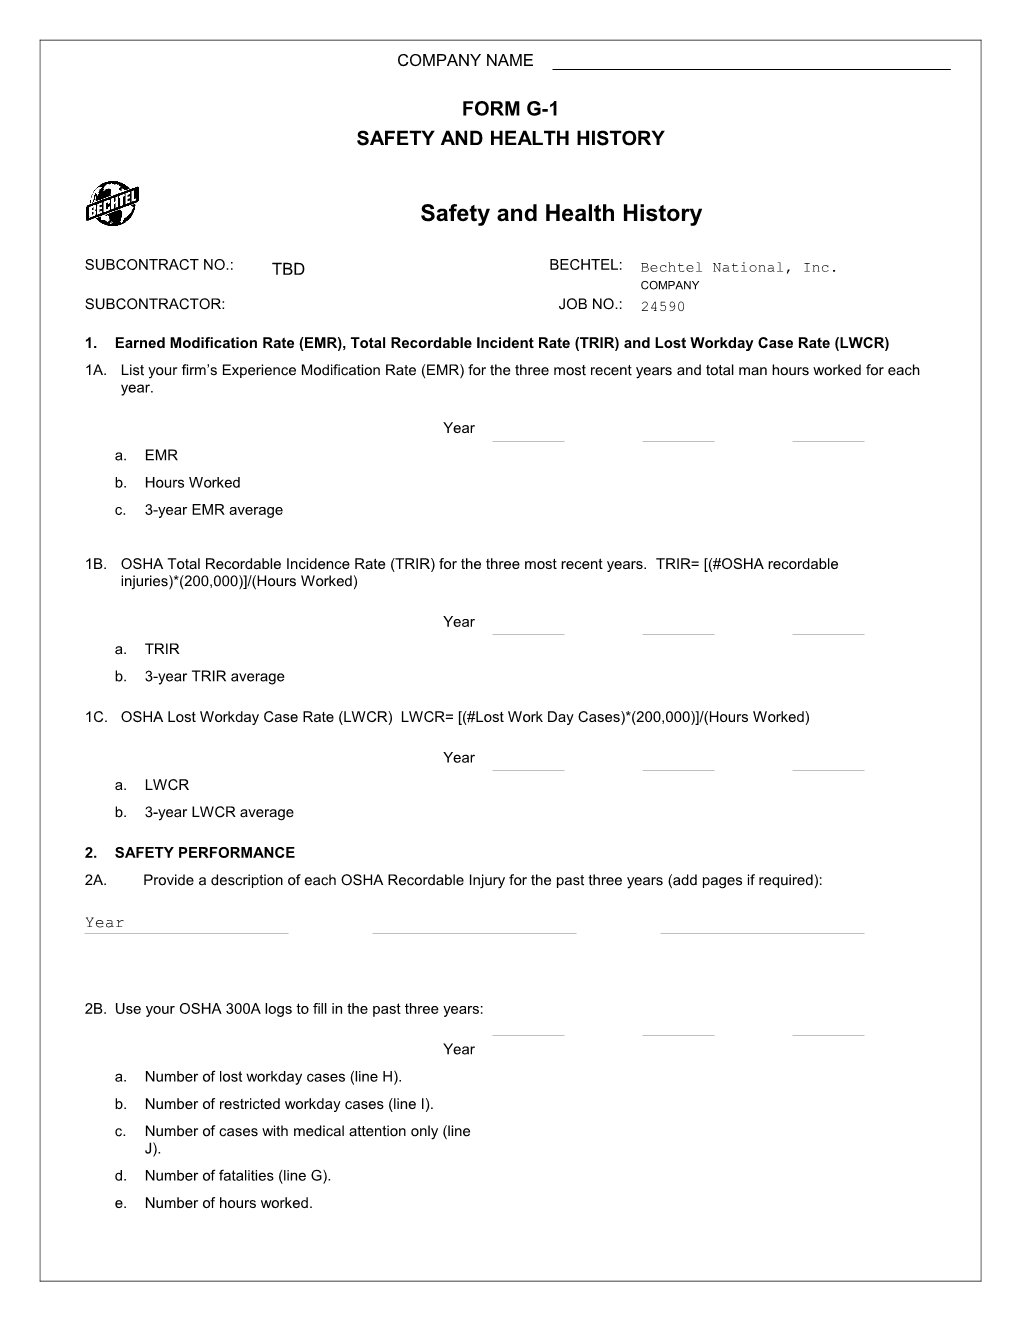 Safety and Health History